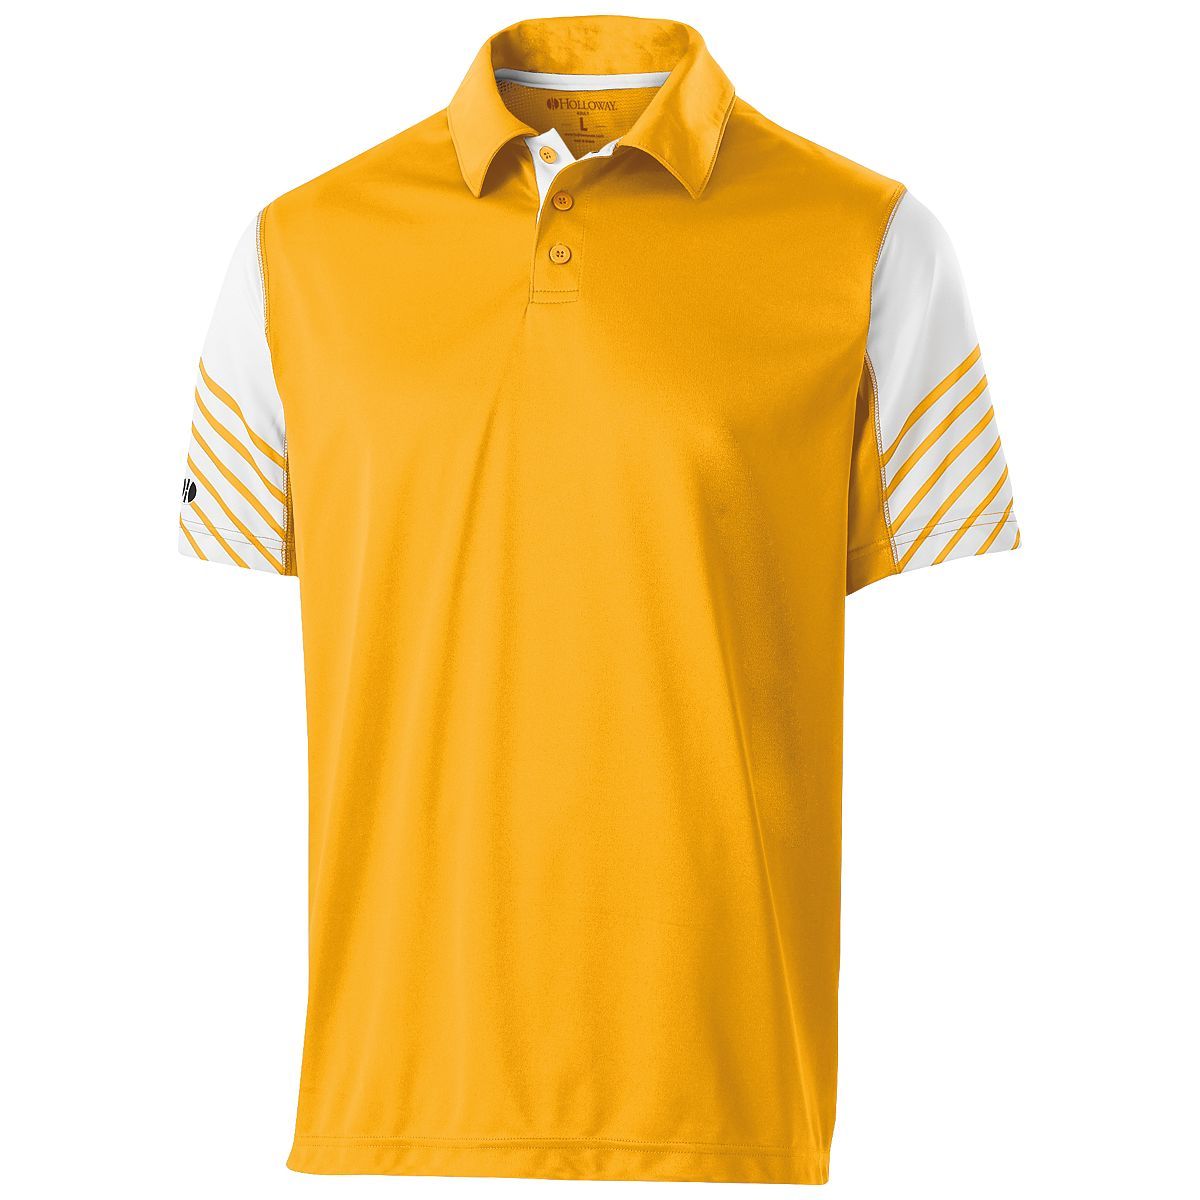 Holloway Arc Polo in Light Gold/White  -Part of the Adult, Adult-Polos, Polos, Holloway, Shirts product lines at KanaleyCreations.com